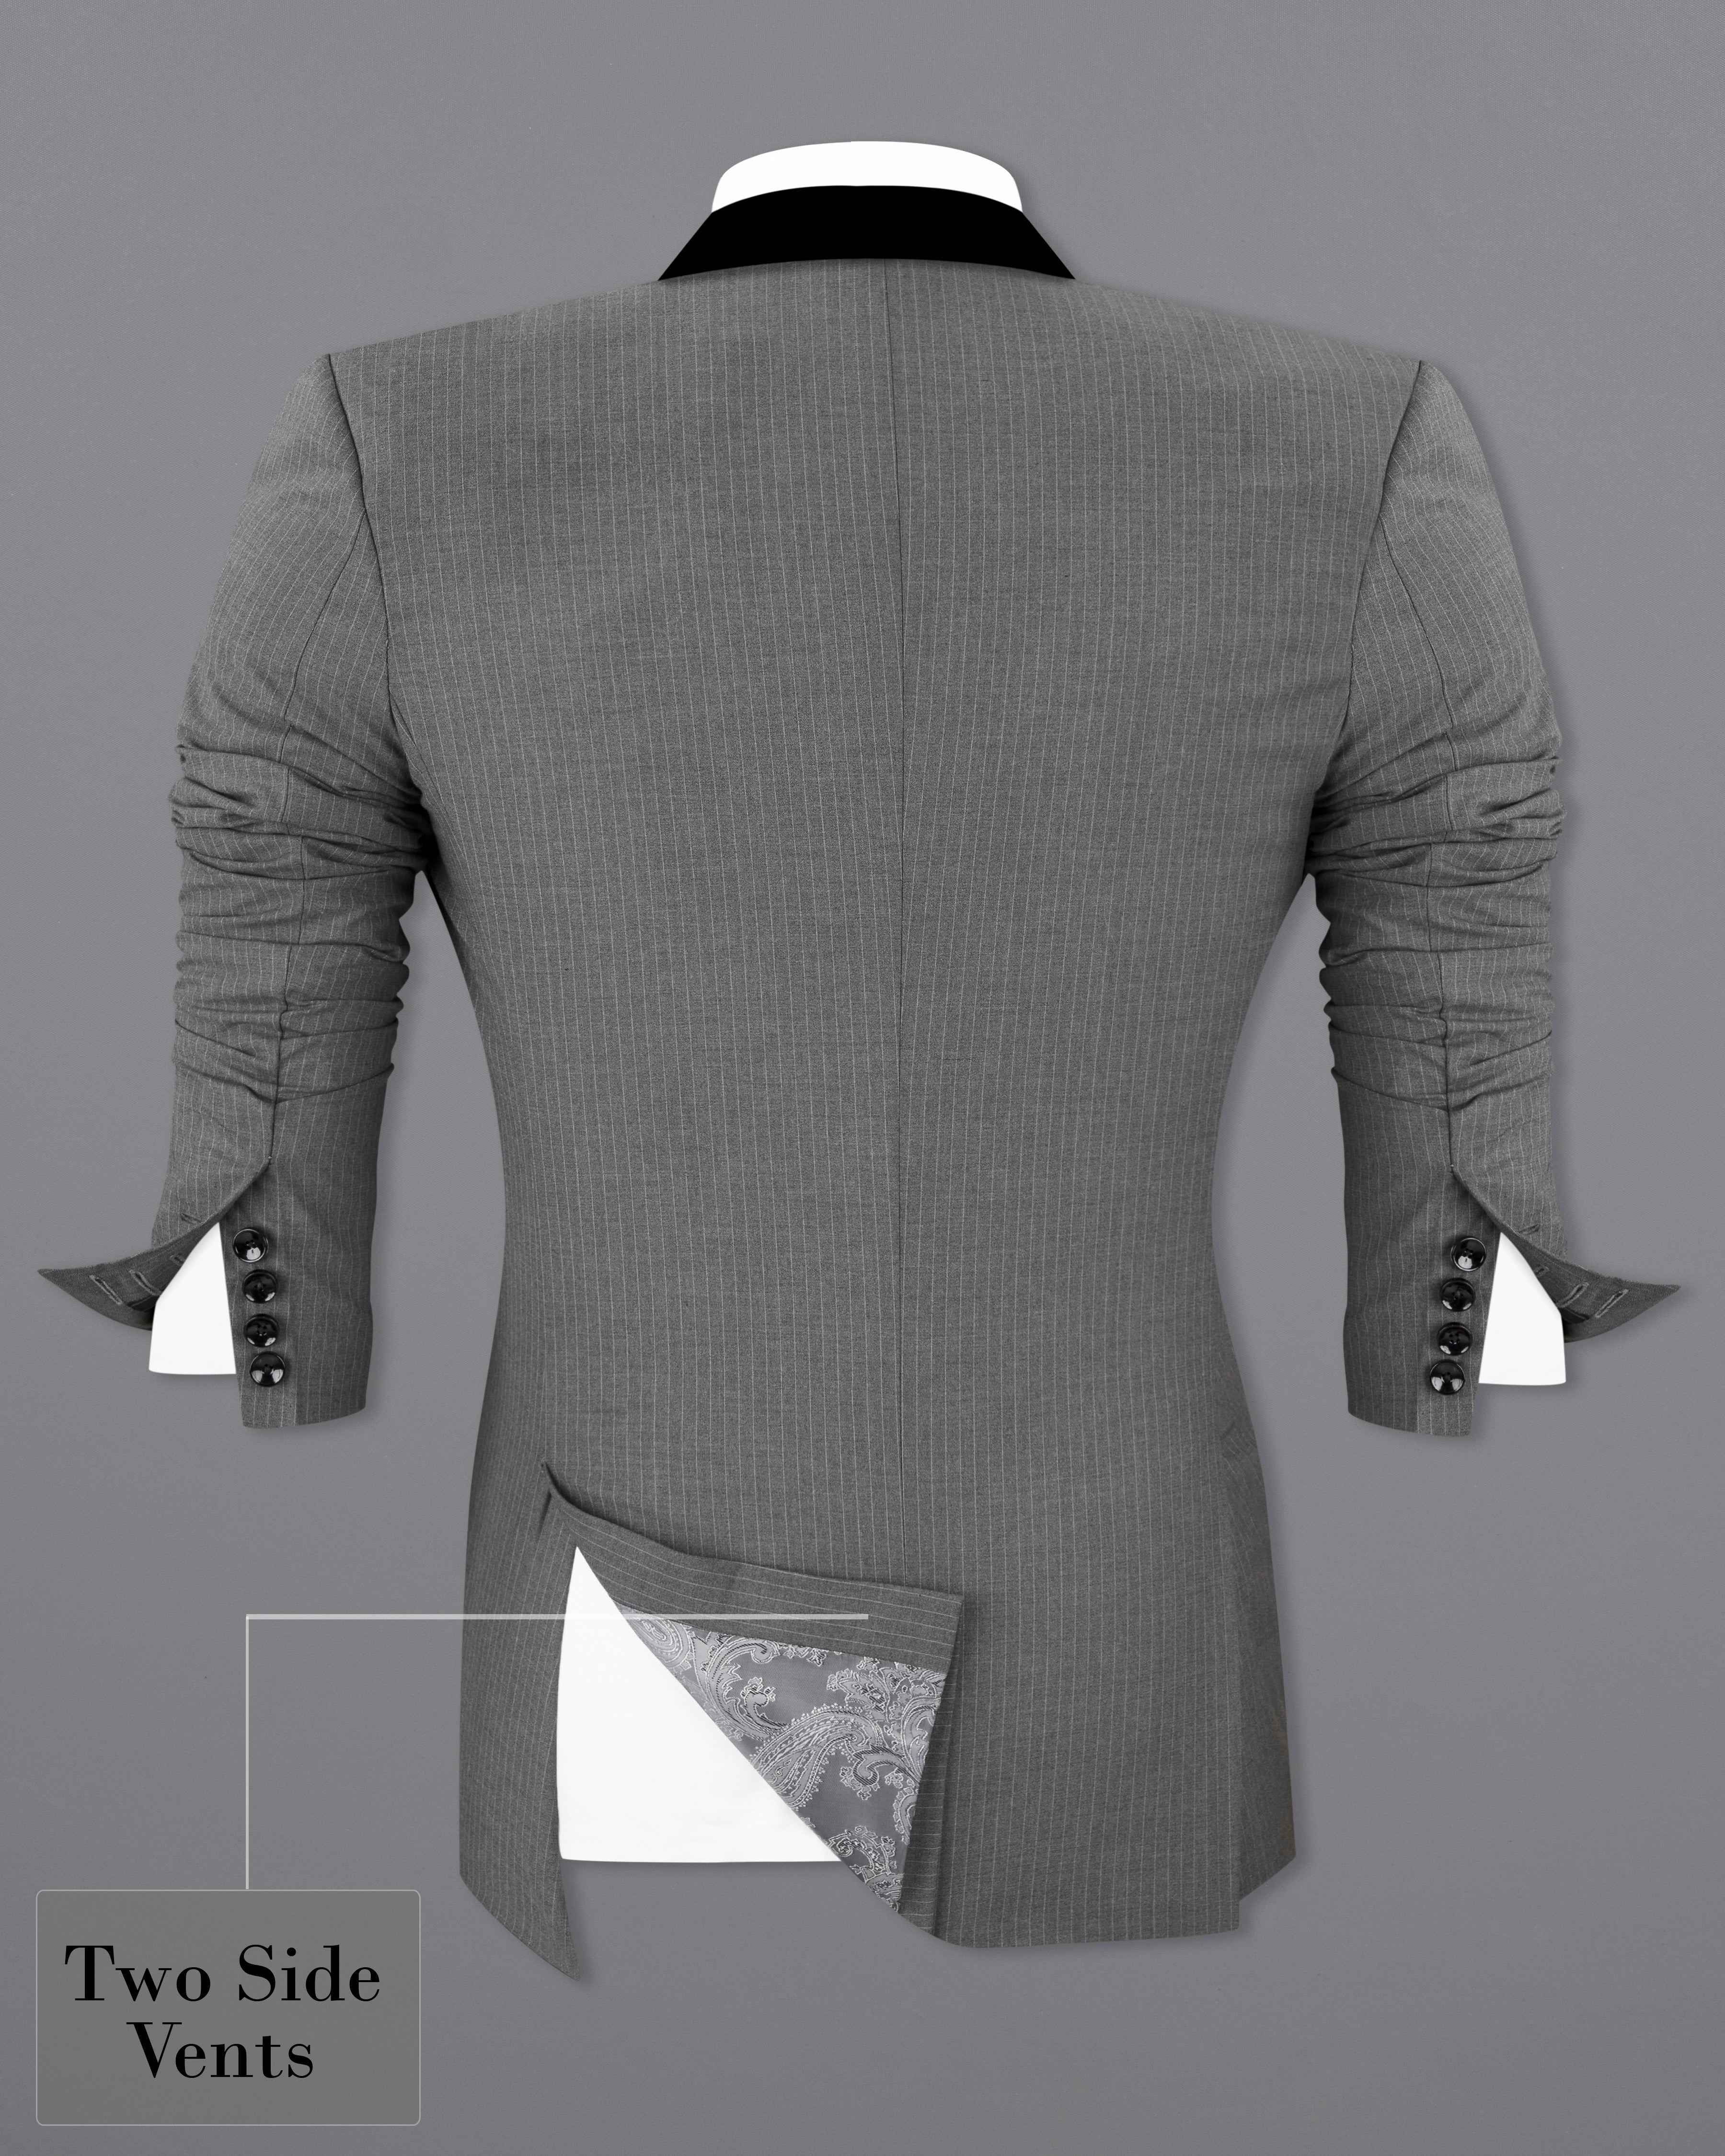 Ironside Gray Striped Double Breasted Designer Blazer BL2539-DB-D245-36, BL2539-DB-D245-38, BL2539-DB-D245-40, BL2539-DB-D245-42, BL2539-DB-D245-44, BL2539-DB-D245-46, BL2539-DB-D245-48, BL2539-DB-D245-50, BL2539-DB-D245-53, BL2539-DB-D245-54, BL2539-DB-D245-56, BL2539-DB-D245-58, BL2539-DB-D245-60